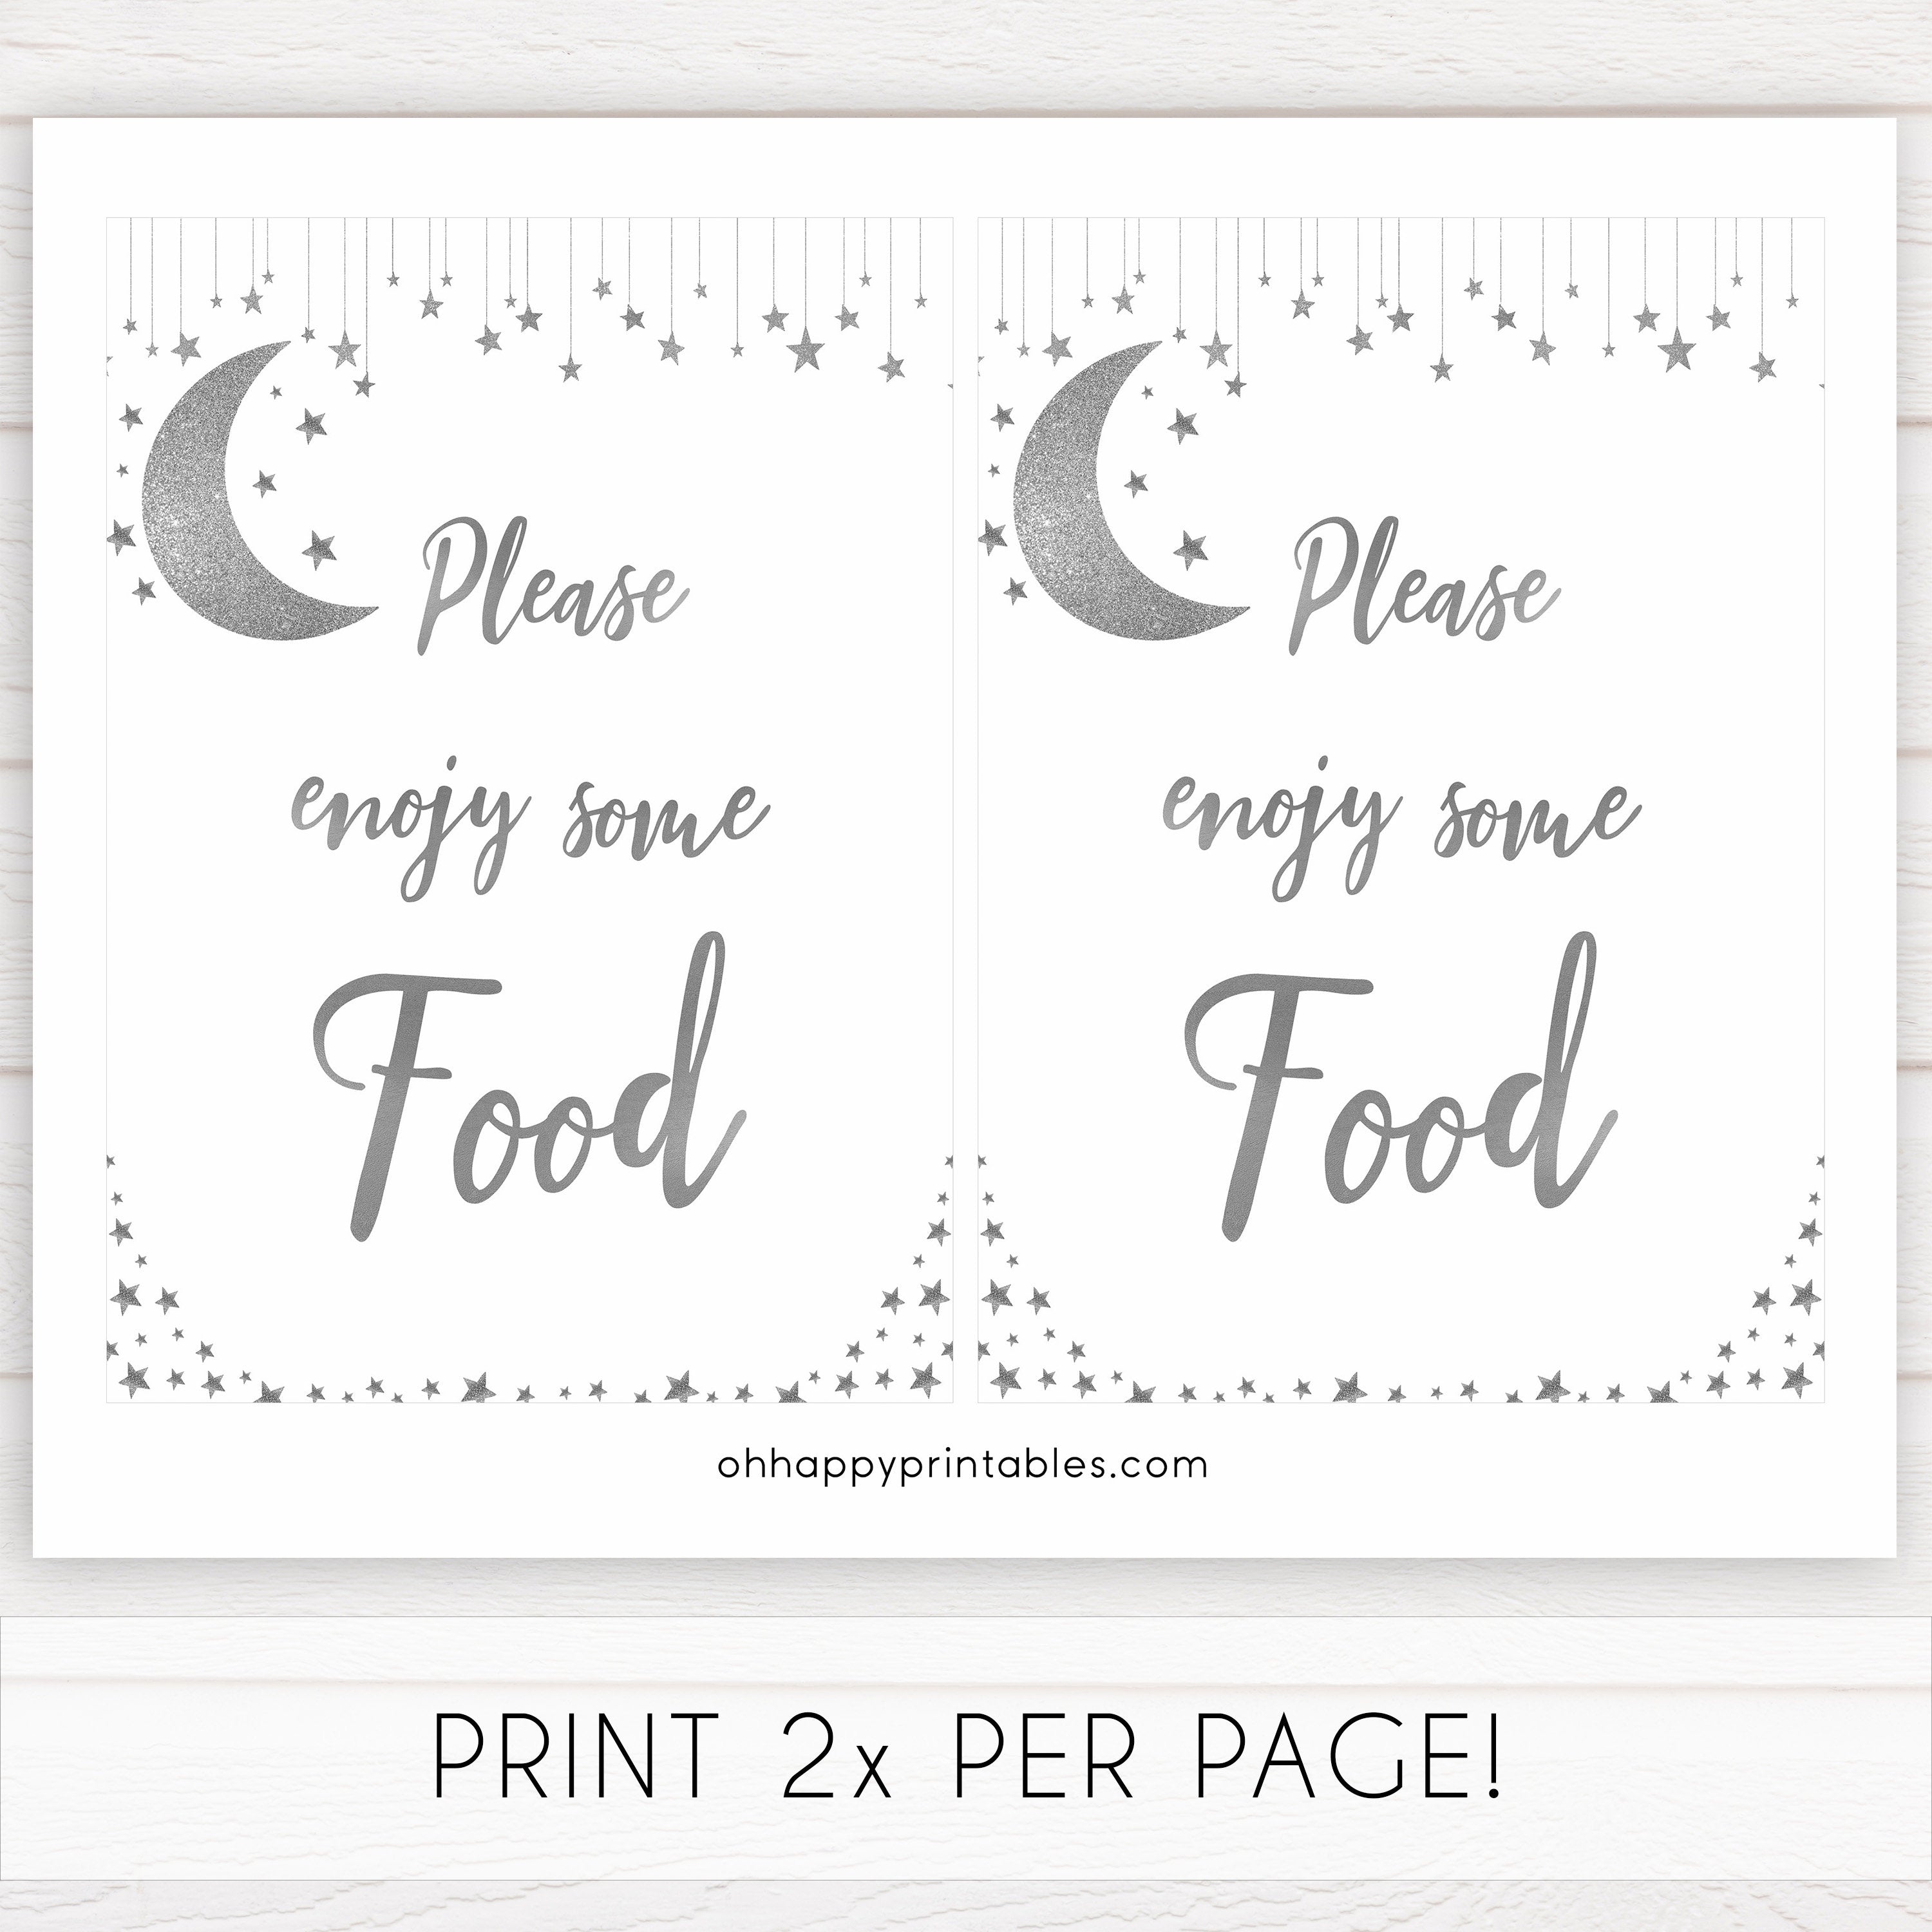 Food Bay Signs, Little star baby signs, printable baby signs, printable baby decor, twinkle baby shower, star baby decor, fun baby shower ideas, top baby shower themes